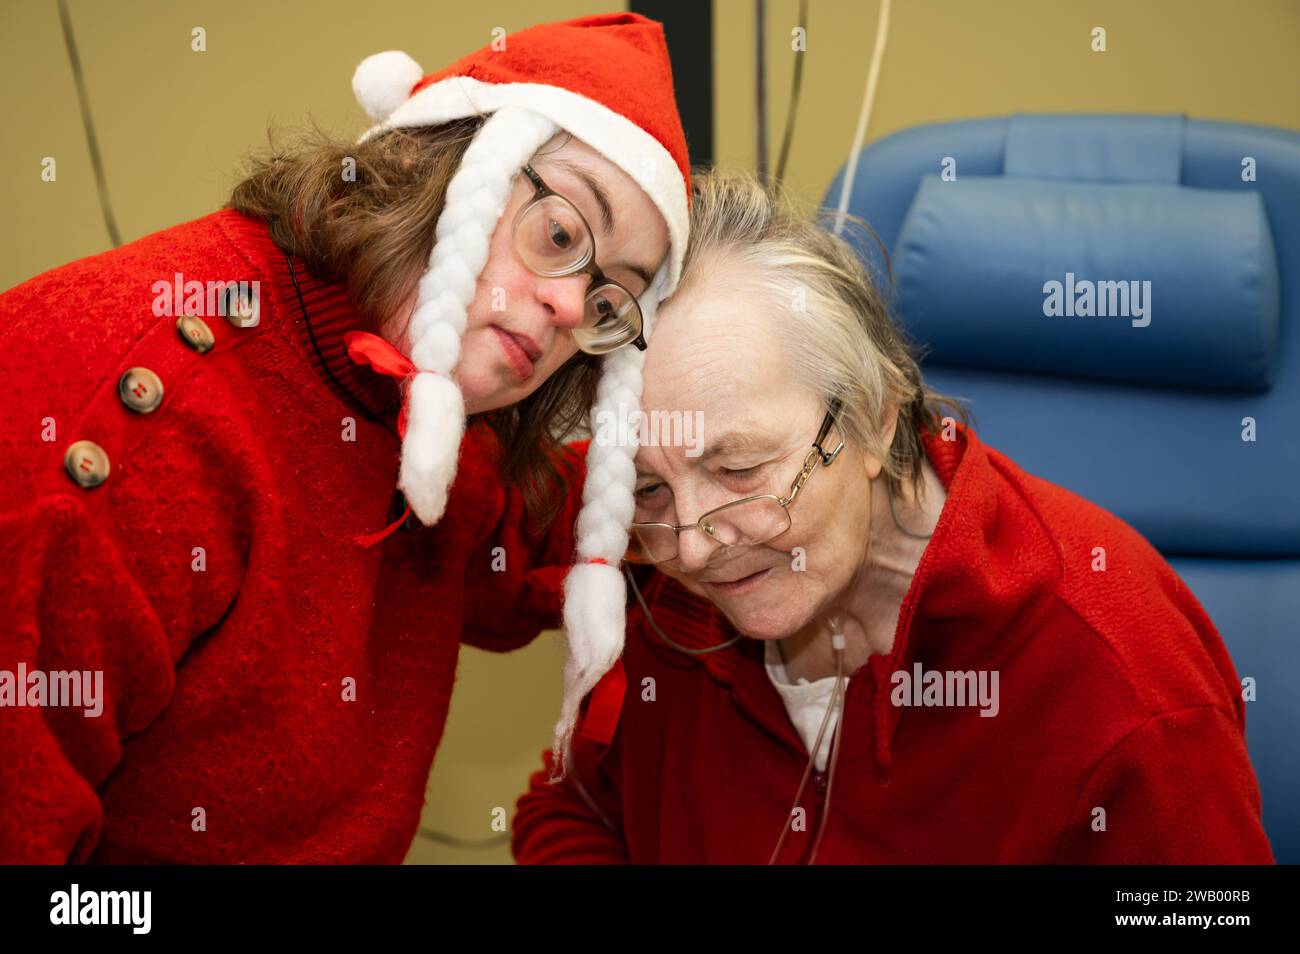 Tender family moment between a 41 yo woman with the Down Syndrome and her 85 yo mother during Christmas, Tienen, Belgium Stock Photo